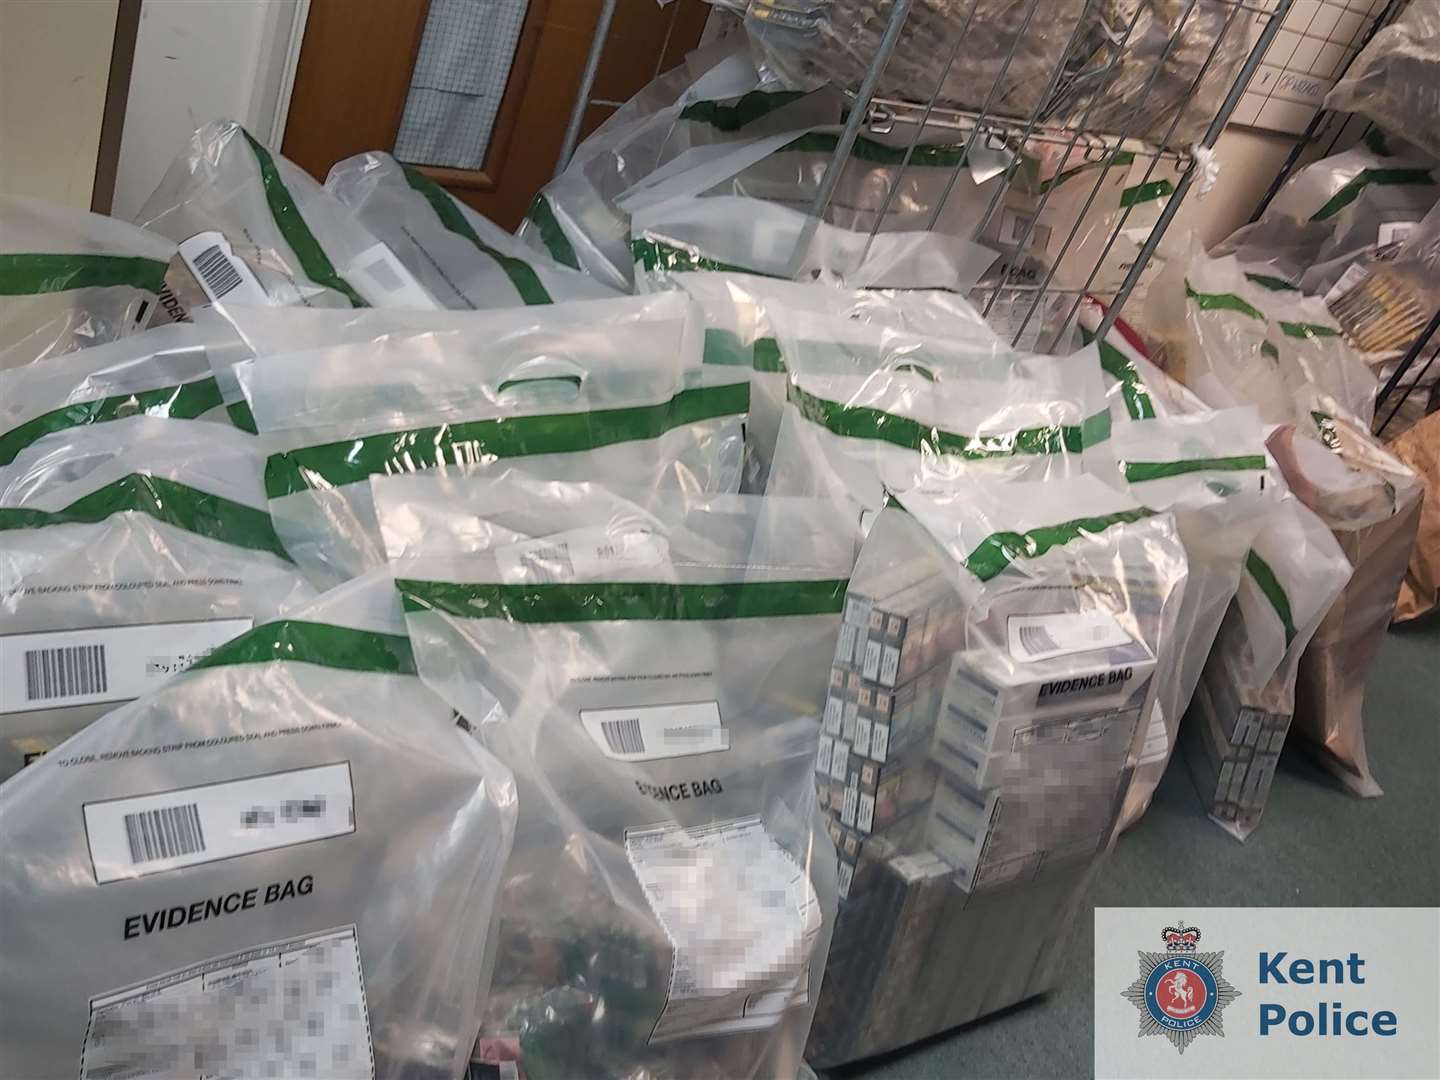 More than 5,000 packets of tobacco have been seized. Photo: Kent Police